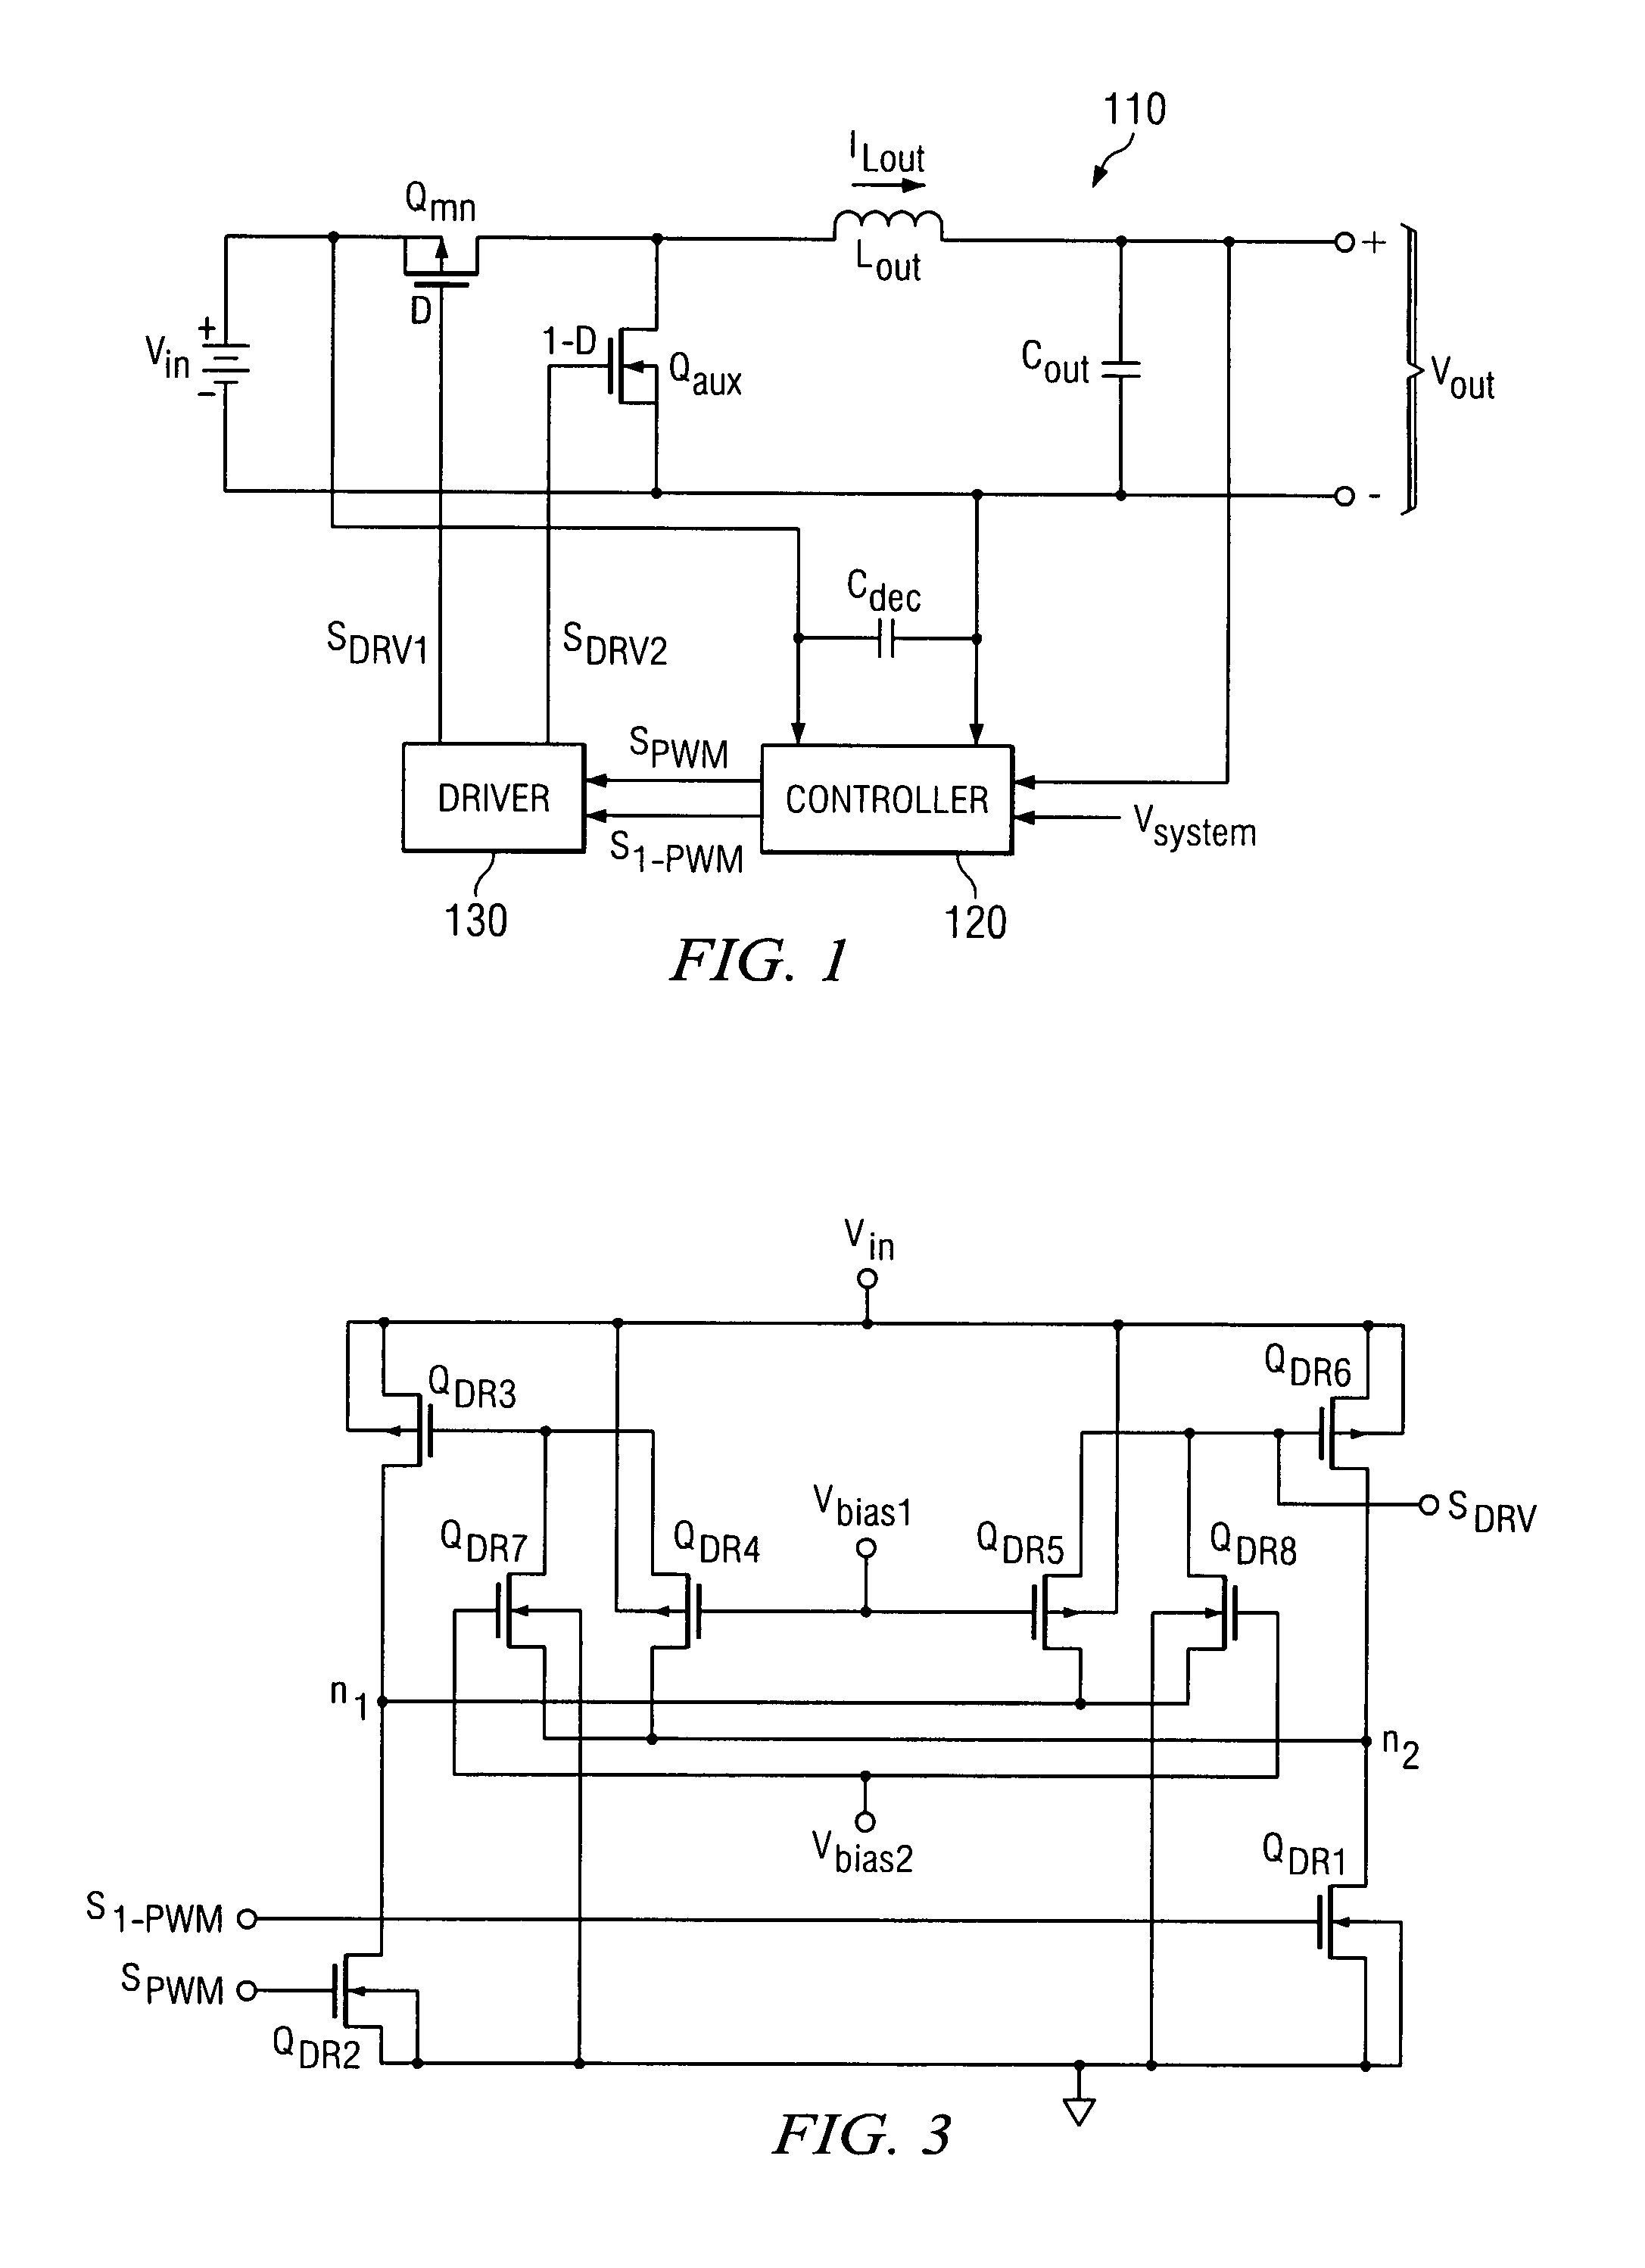 Method of forming an integrated circuit incorporating higher voltage devices and low voltage devices therein